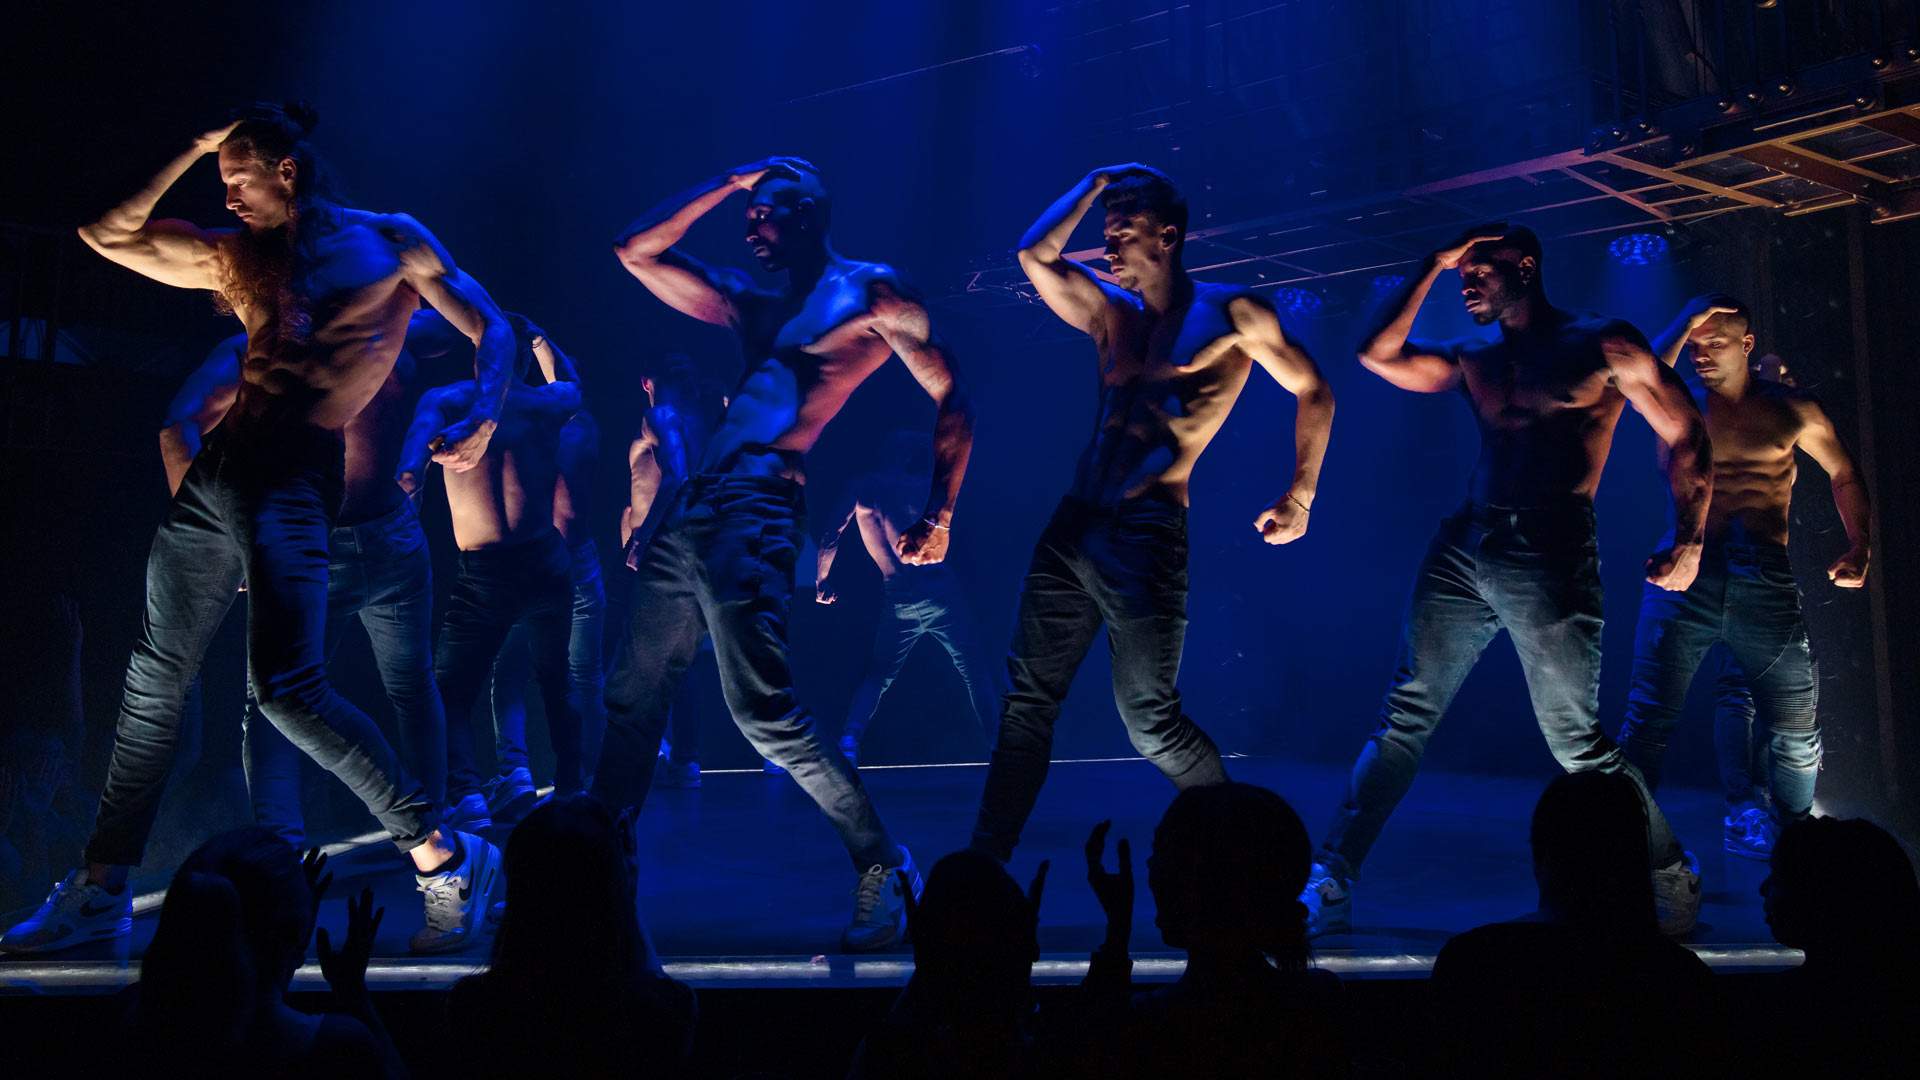 Channing Tatum's 'Magic Mike Live' Show Is Coming to Australia So You